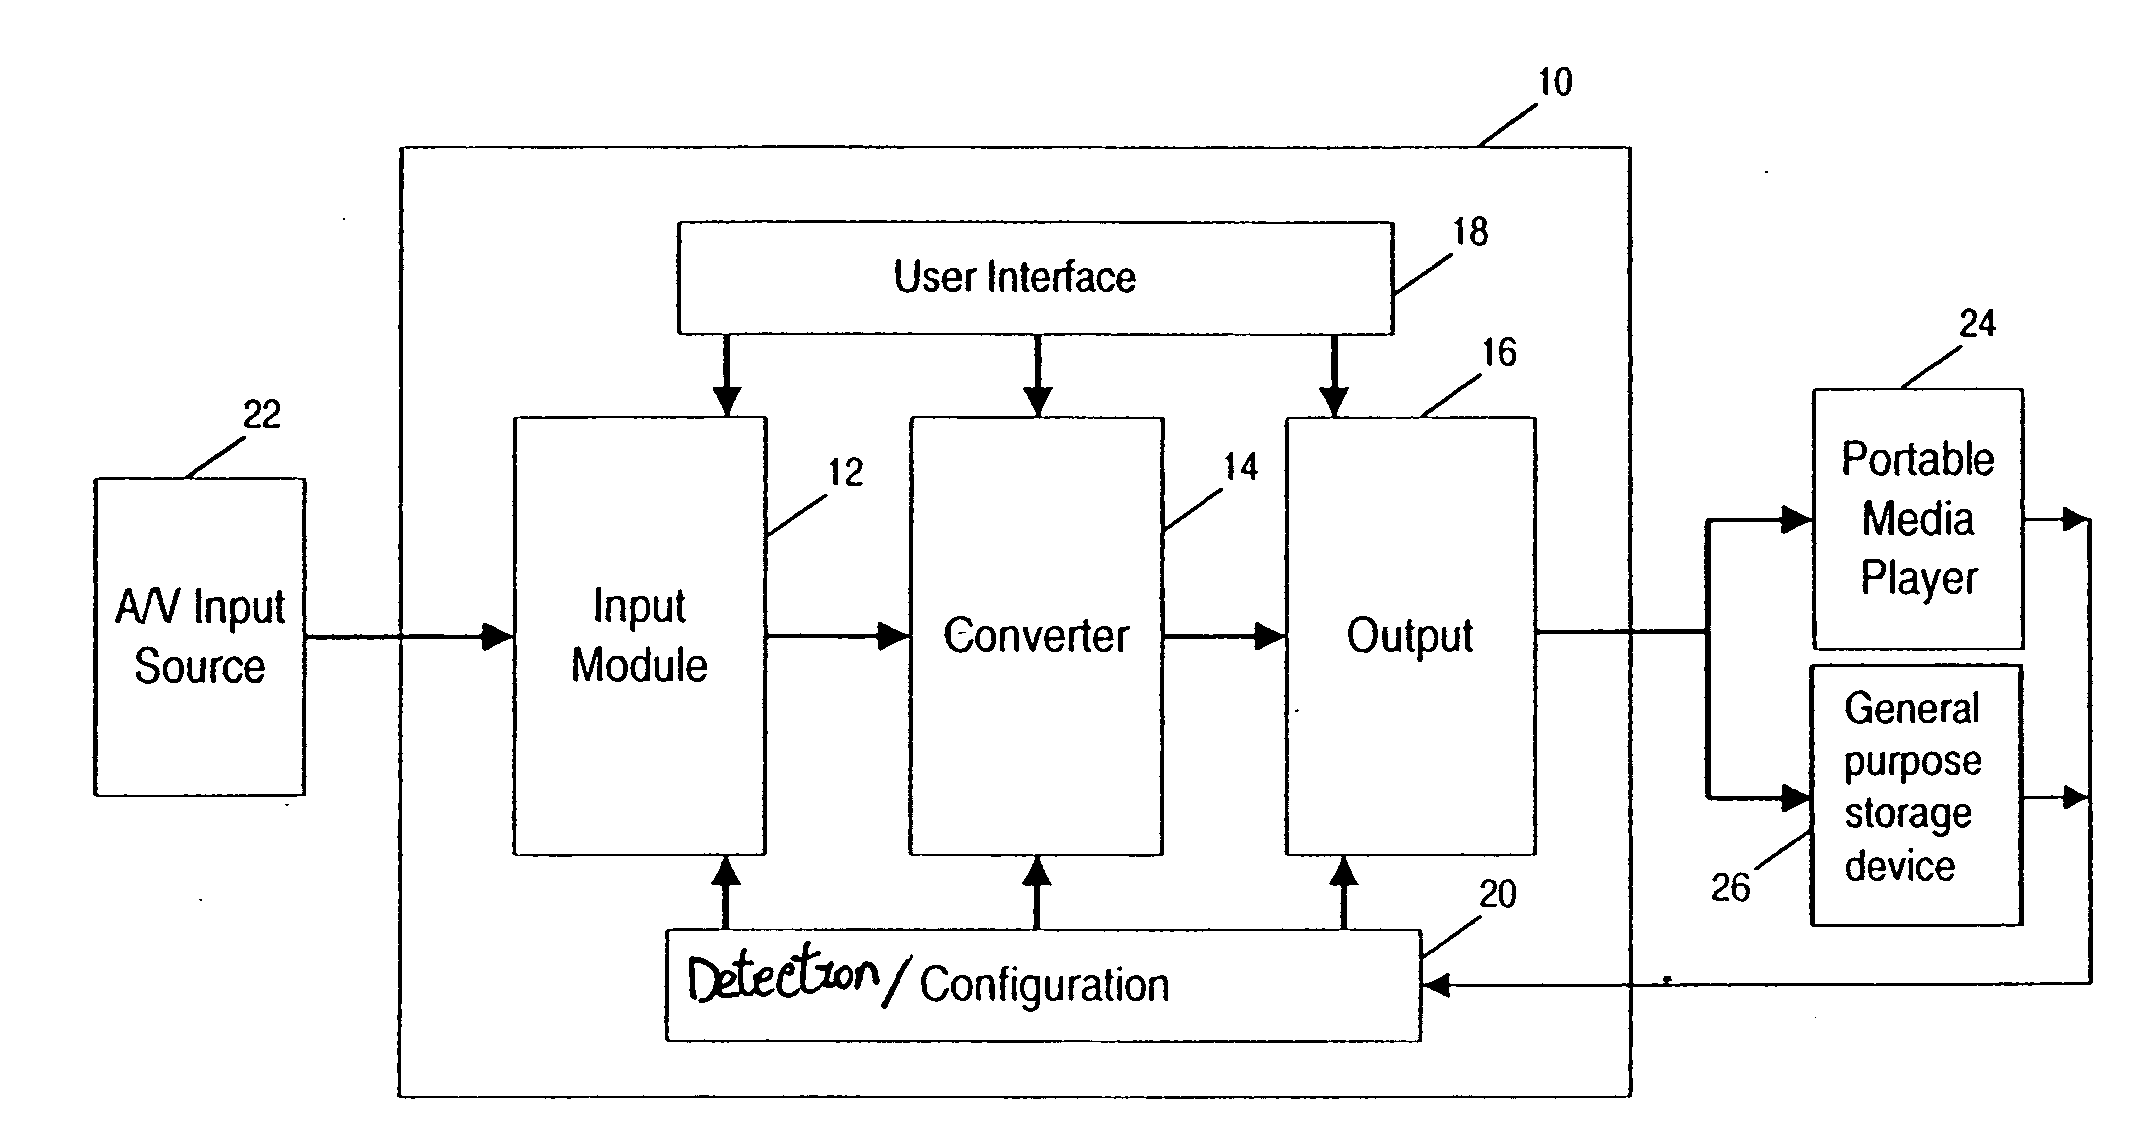 Recording apparatus for use with a range of portable media players